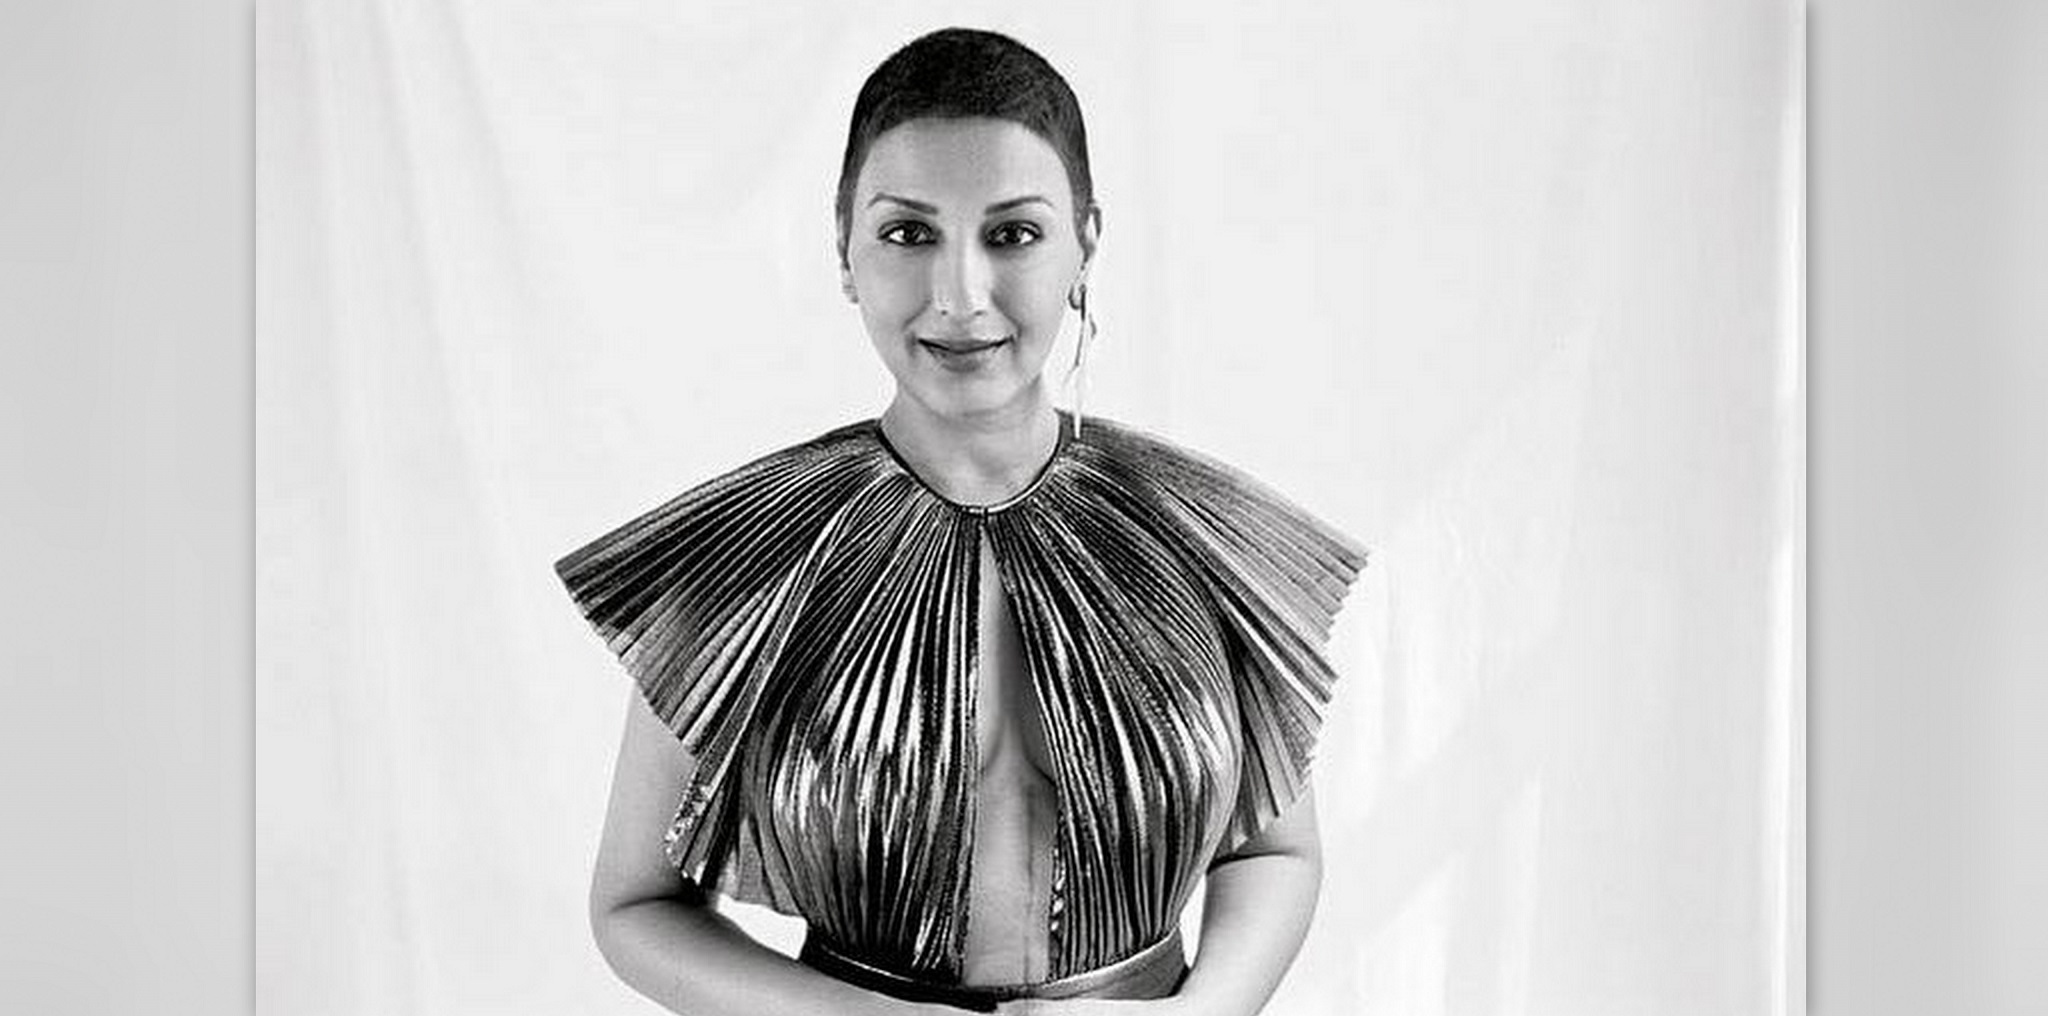 Sonali Bendre Proudly Shows 20-Inch Scar From Cancer Surgery. “I don’t find it ugly anymore”